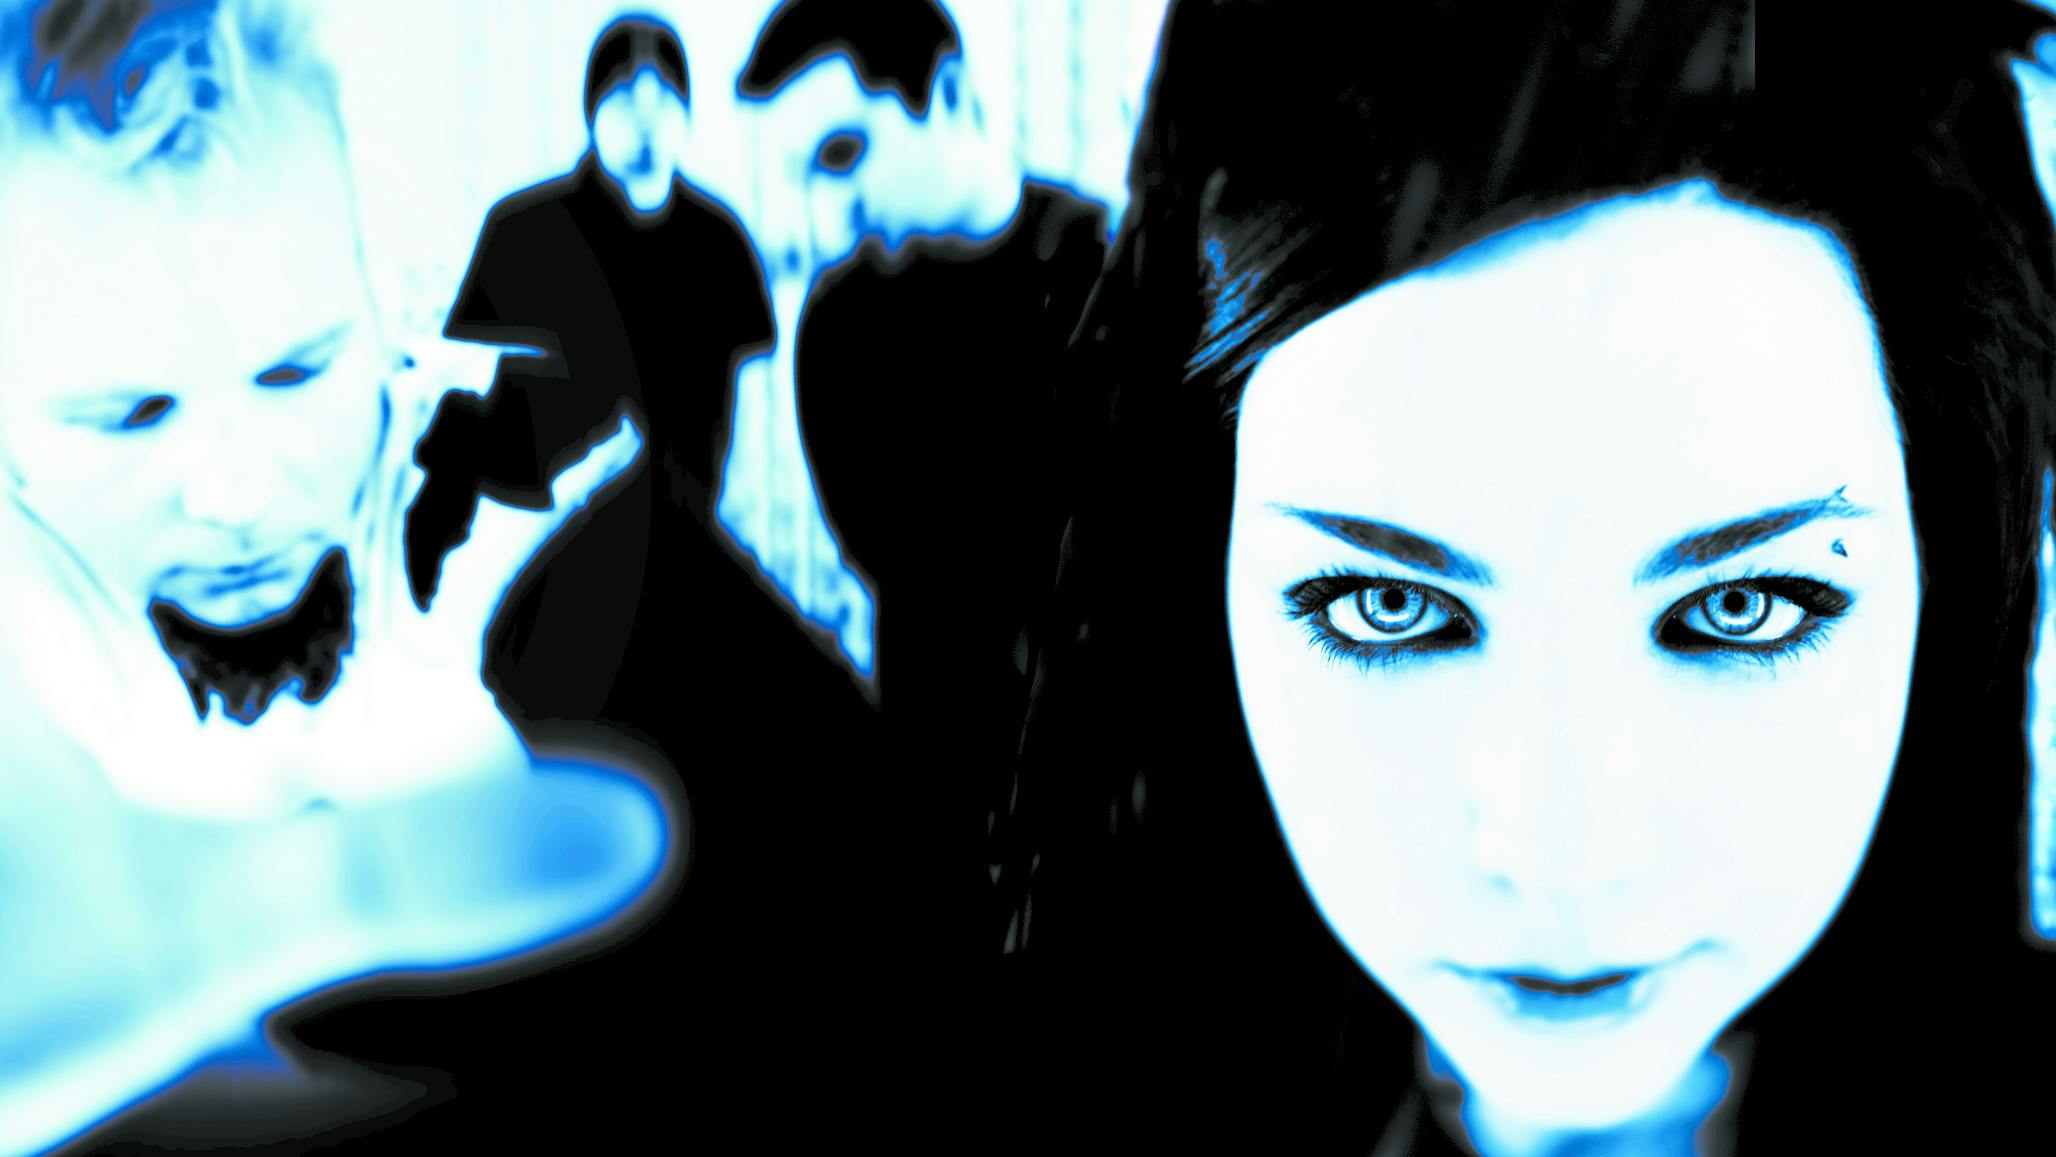 A personal reflection on Fallen: The album that made Evanescence superstars